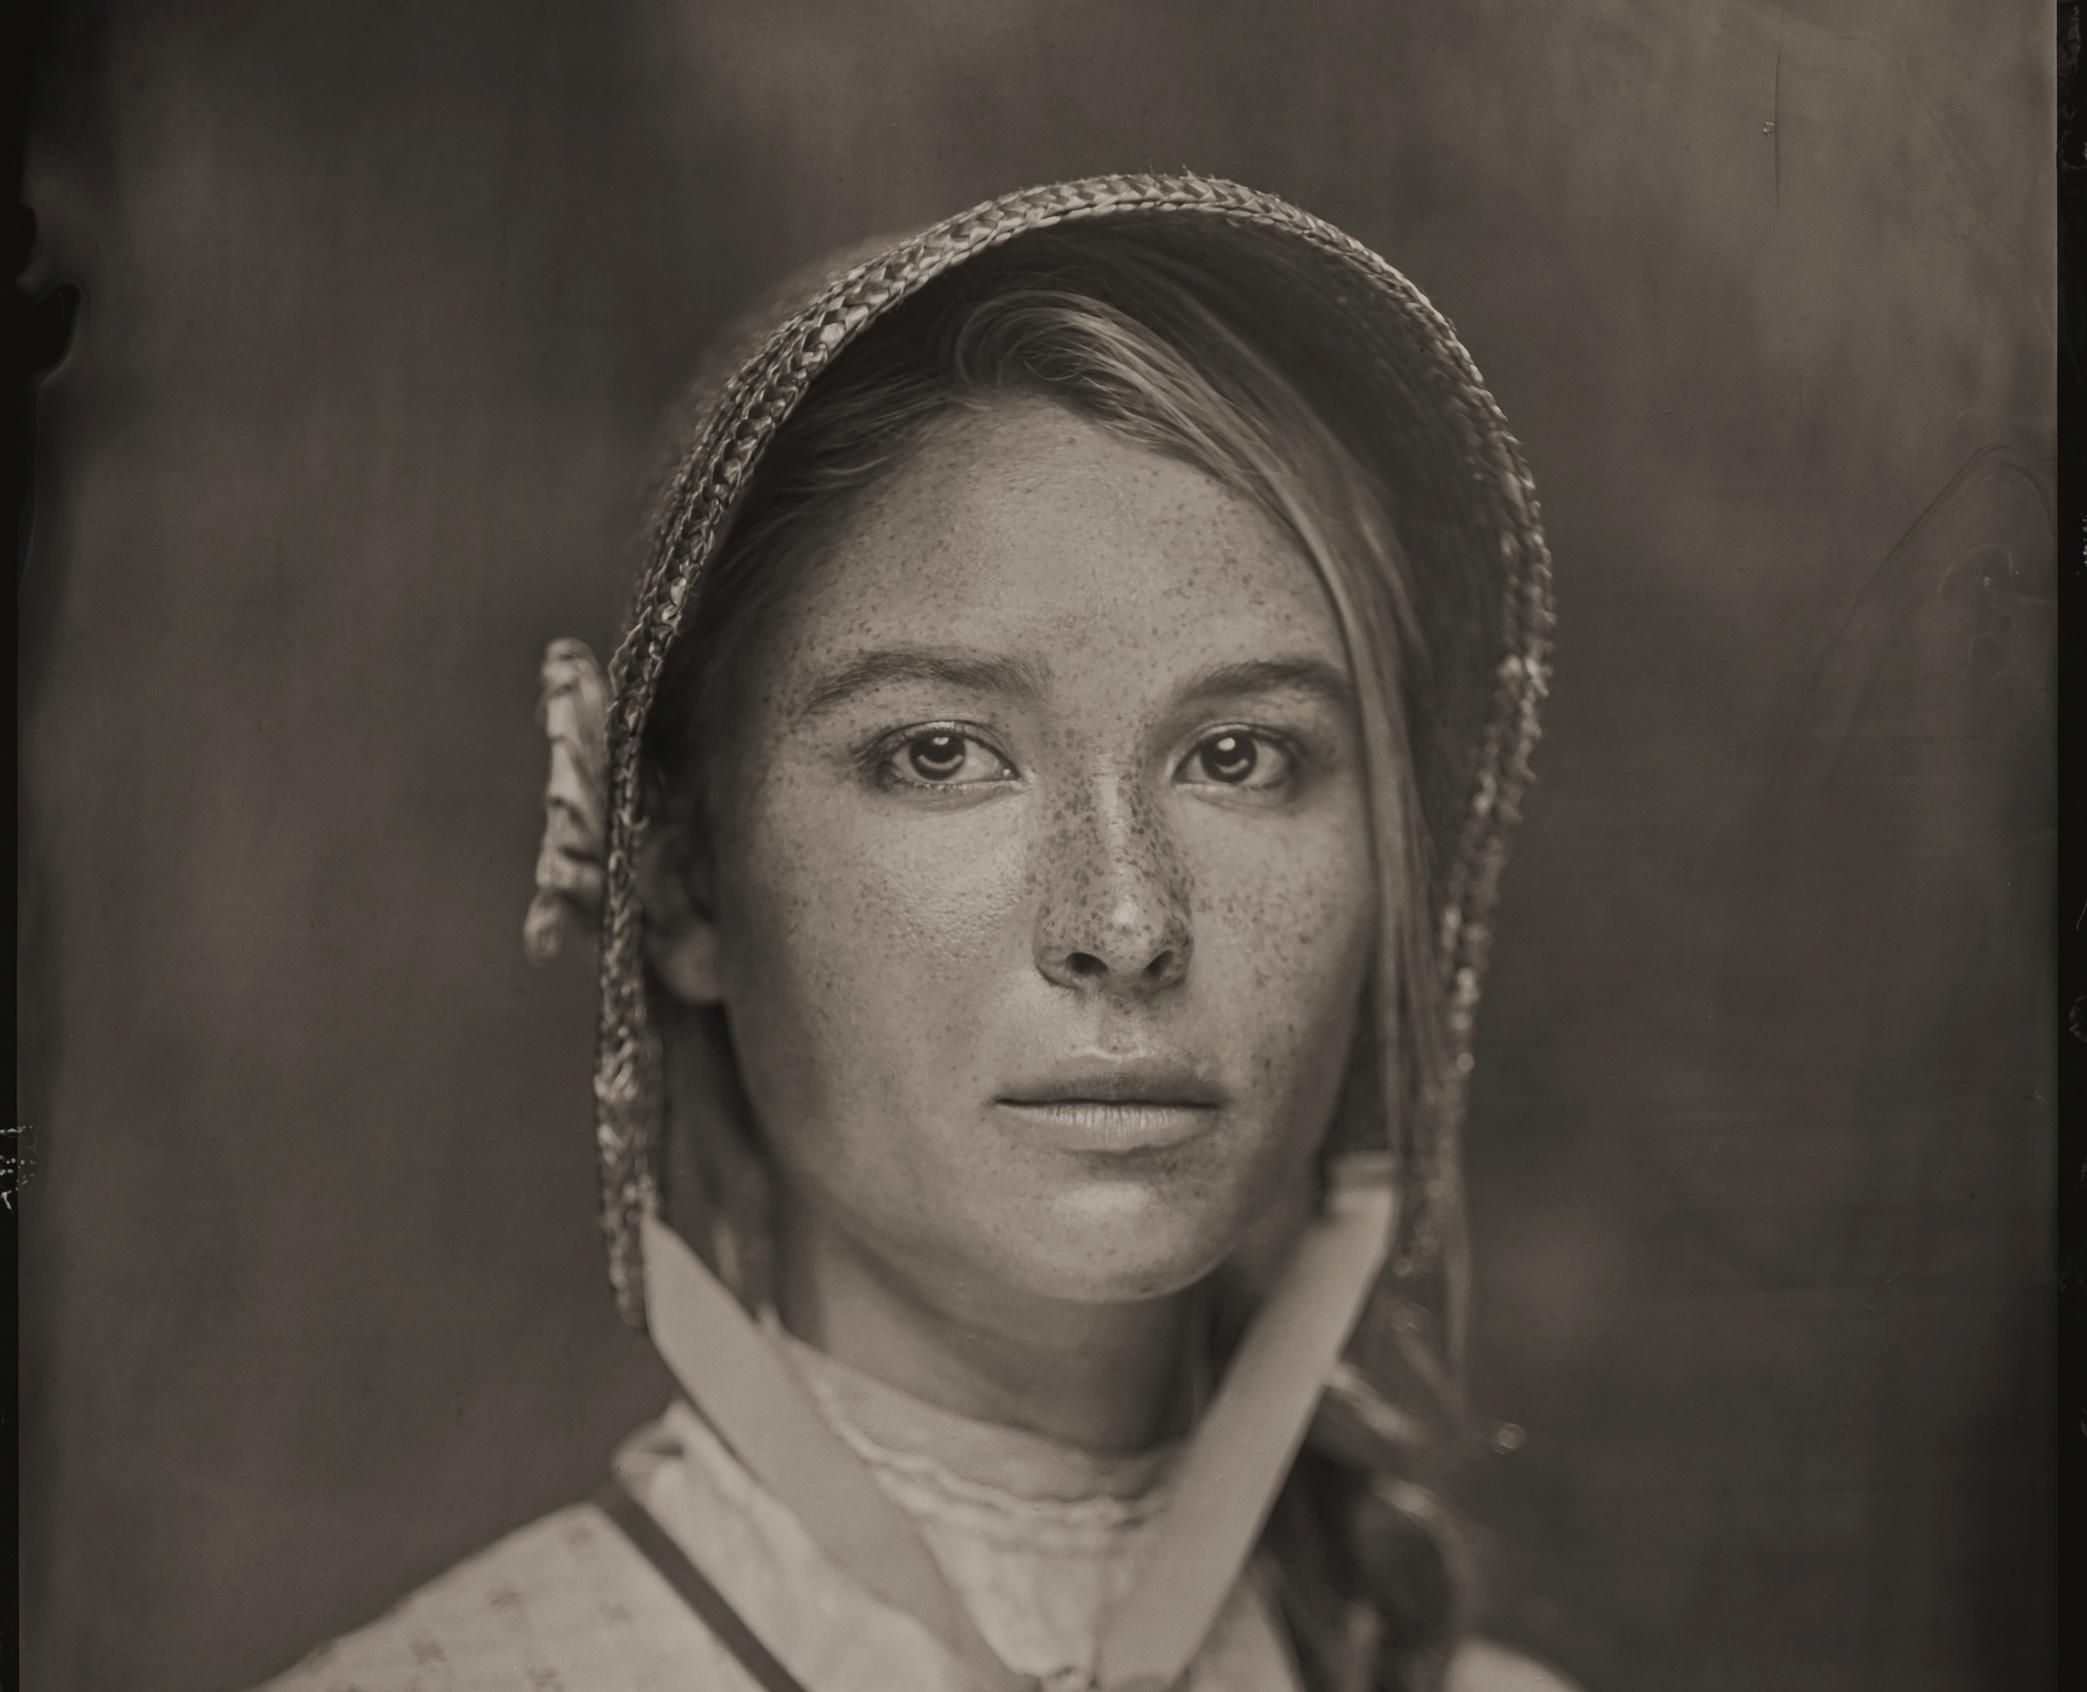 An old west style photo of actress Isabel May as Elsa Dutton from the Paramount+ show 1883.